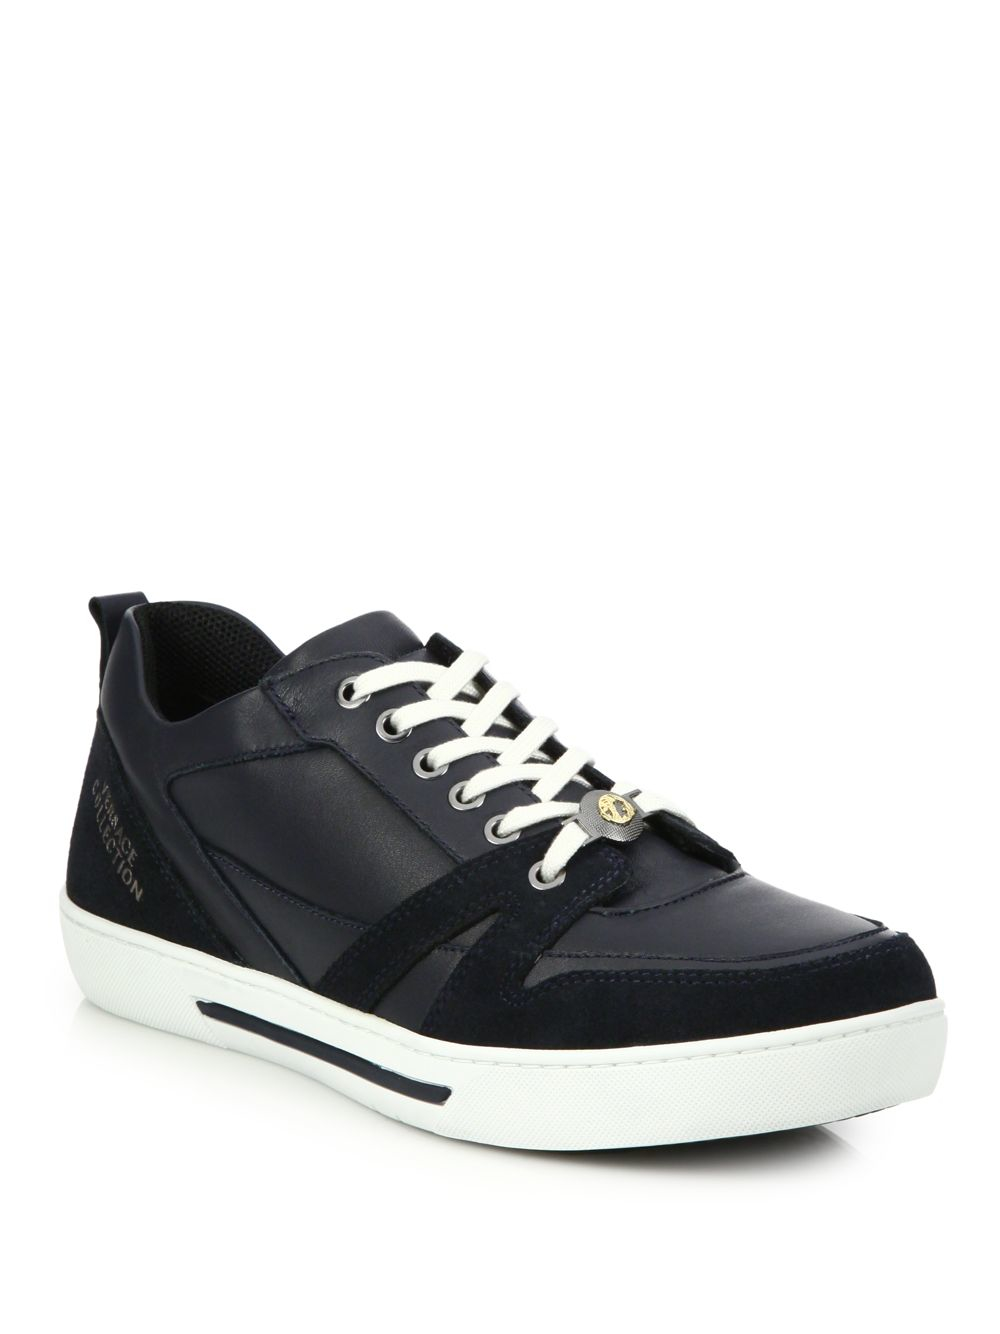 Versace Vernice Vitello Leather & Suede Sneakers in Blue for Men - Lyst